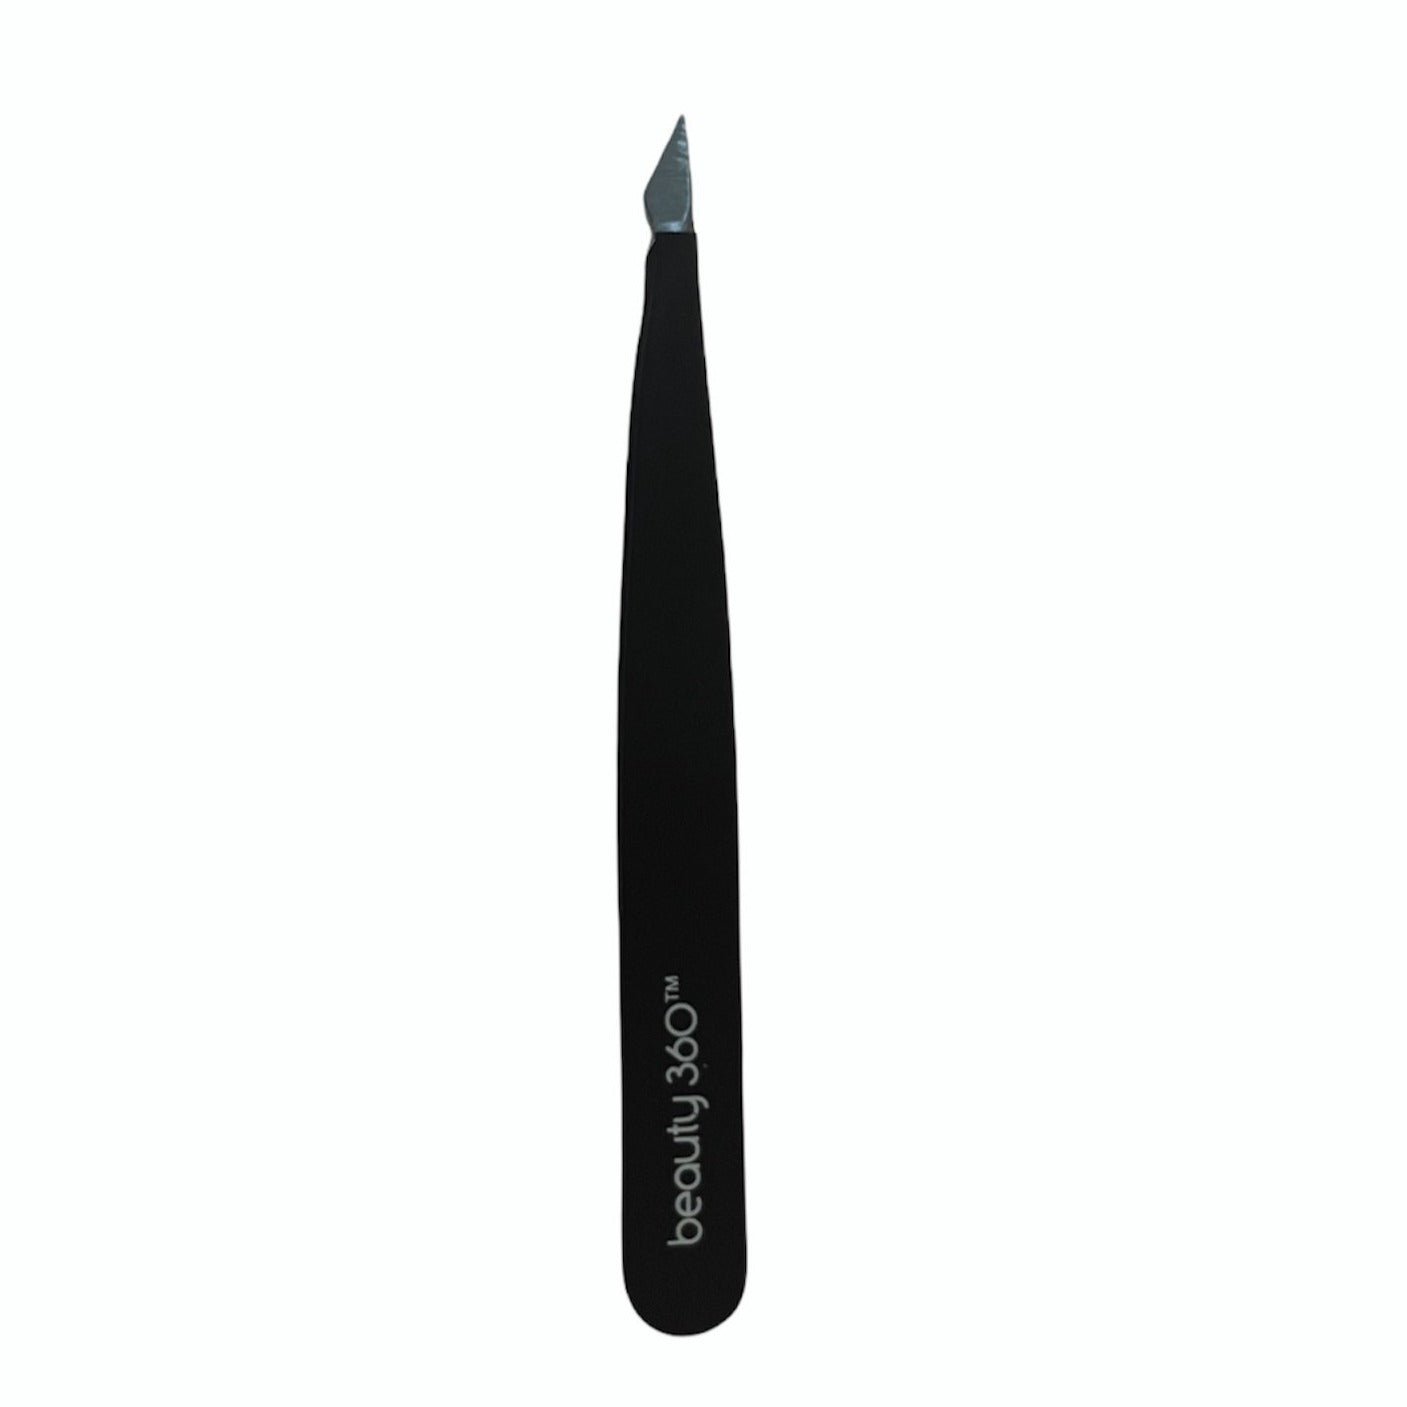 Beauty 360 2-In-1 Precision Stainless Steel Tweezers, Slant & Point Tips Liquidation discount store deal of the day black friday stocking filler